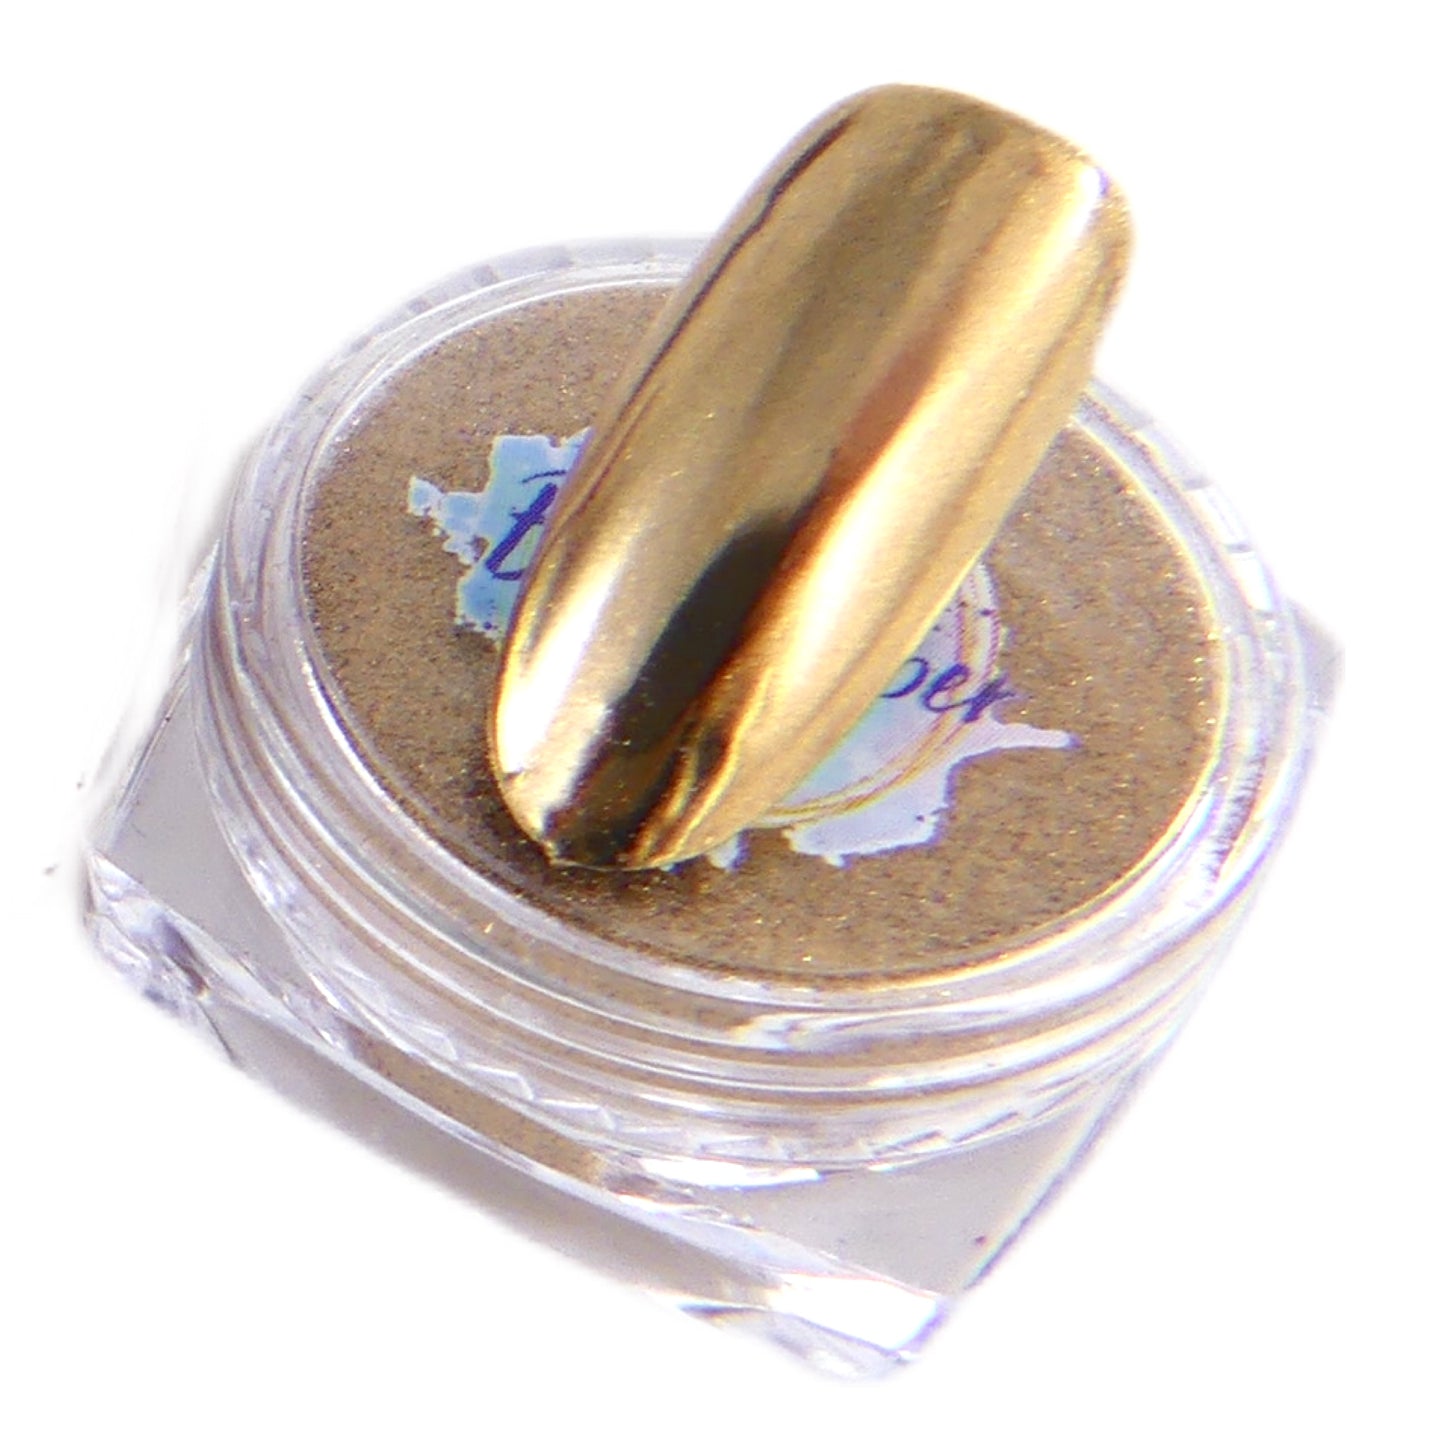 Load image into Gallery viewer, Copper Gold Chrome Nail Art Powder 0.5g - My Little Nail Art Shop
